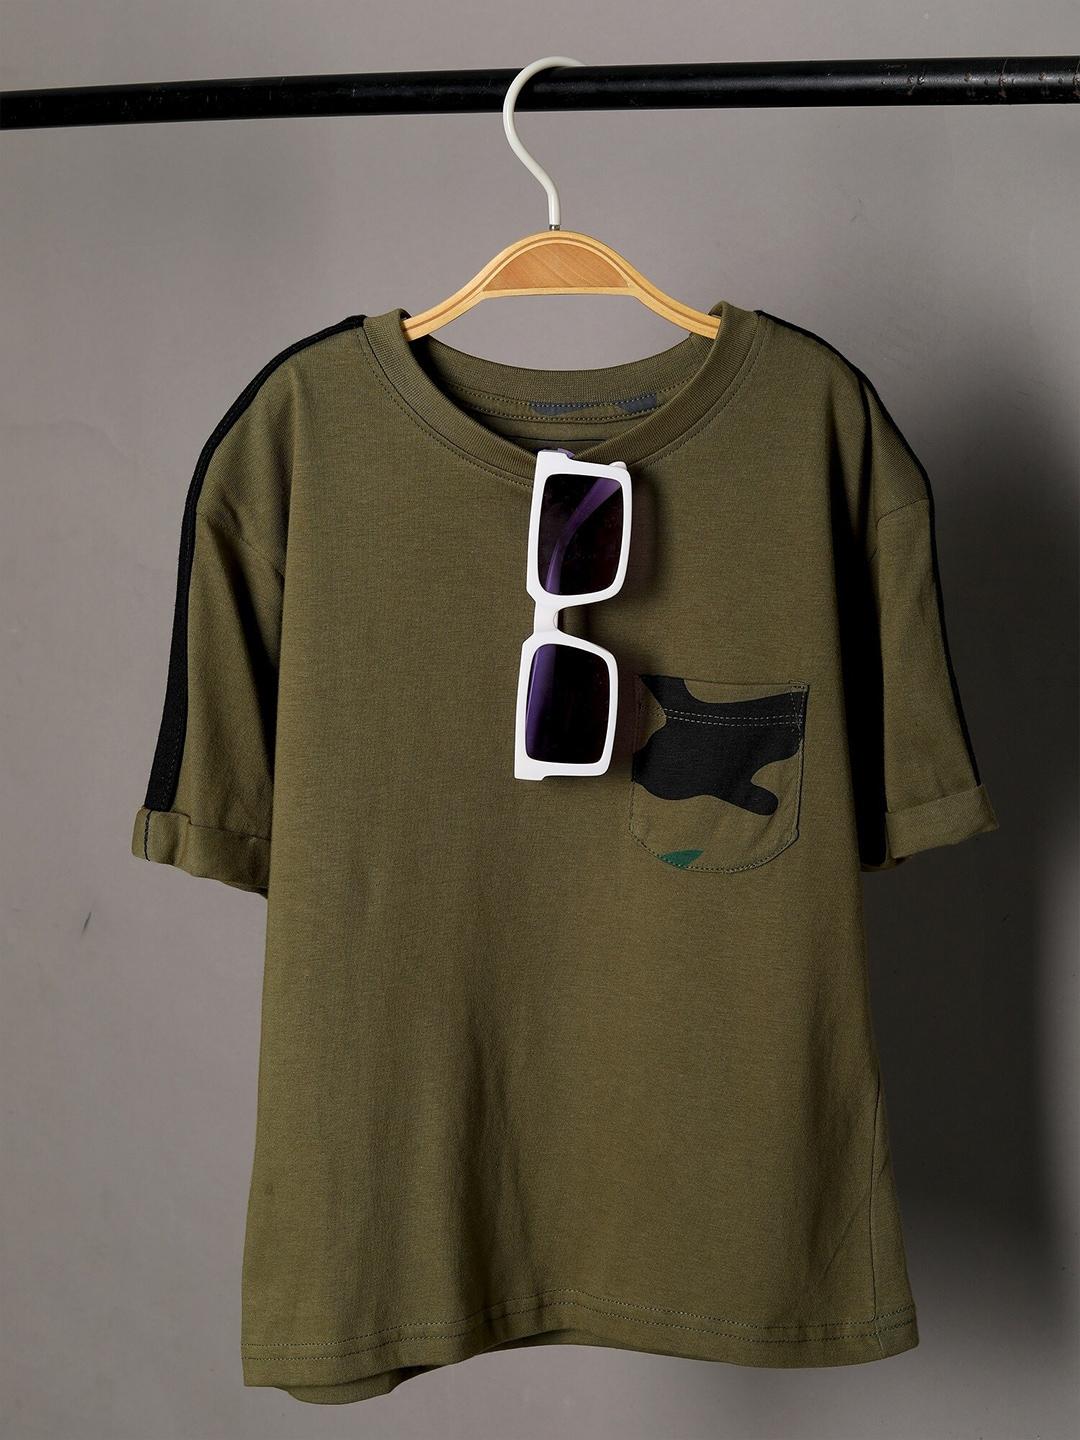 jumping-joey-boys-olive-green-pure-cotton-t-shirt